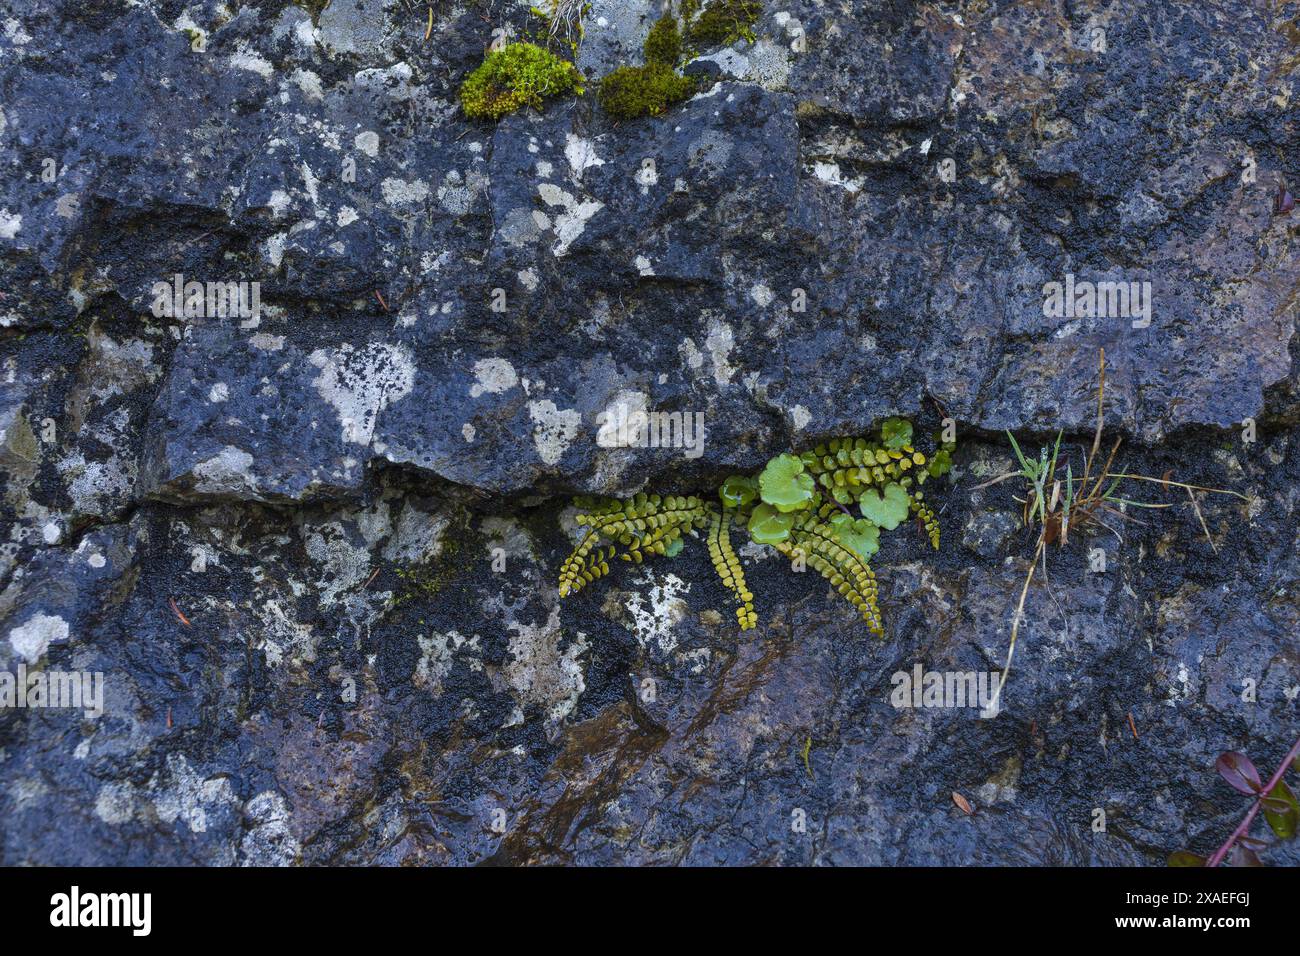 photography of a dark grey granite wall with green fern and tiny plants living in a crack, natural stone texture background Stock Photo